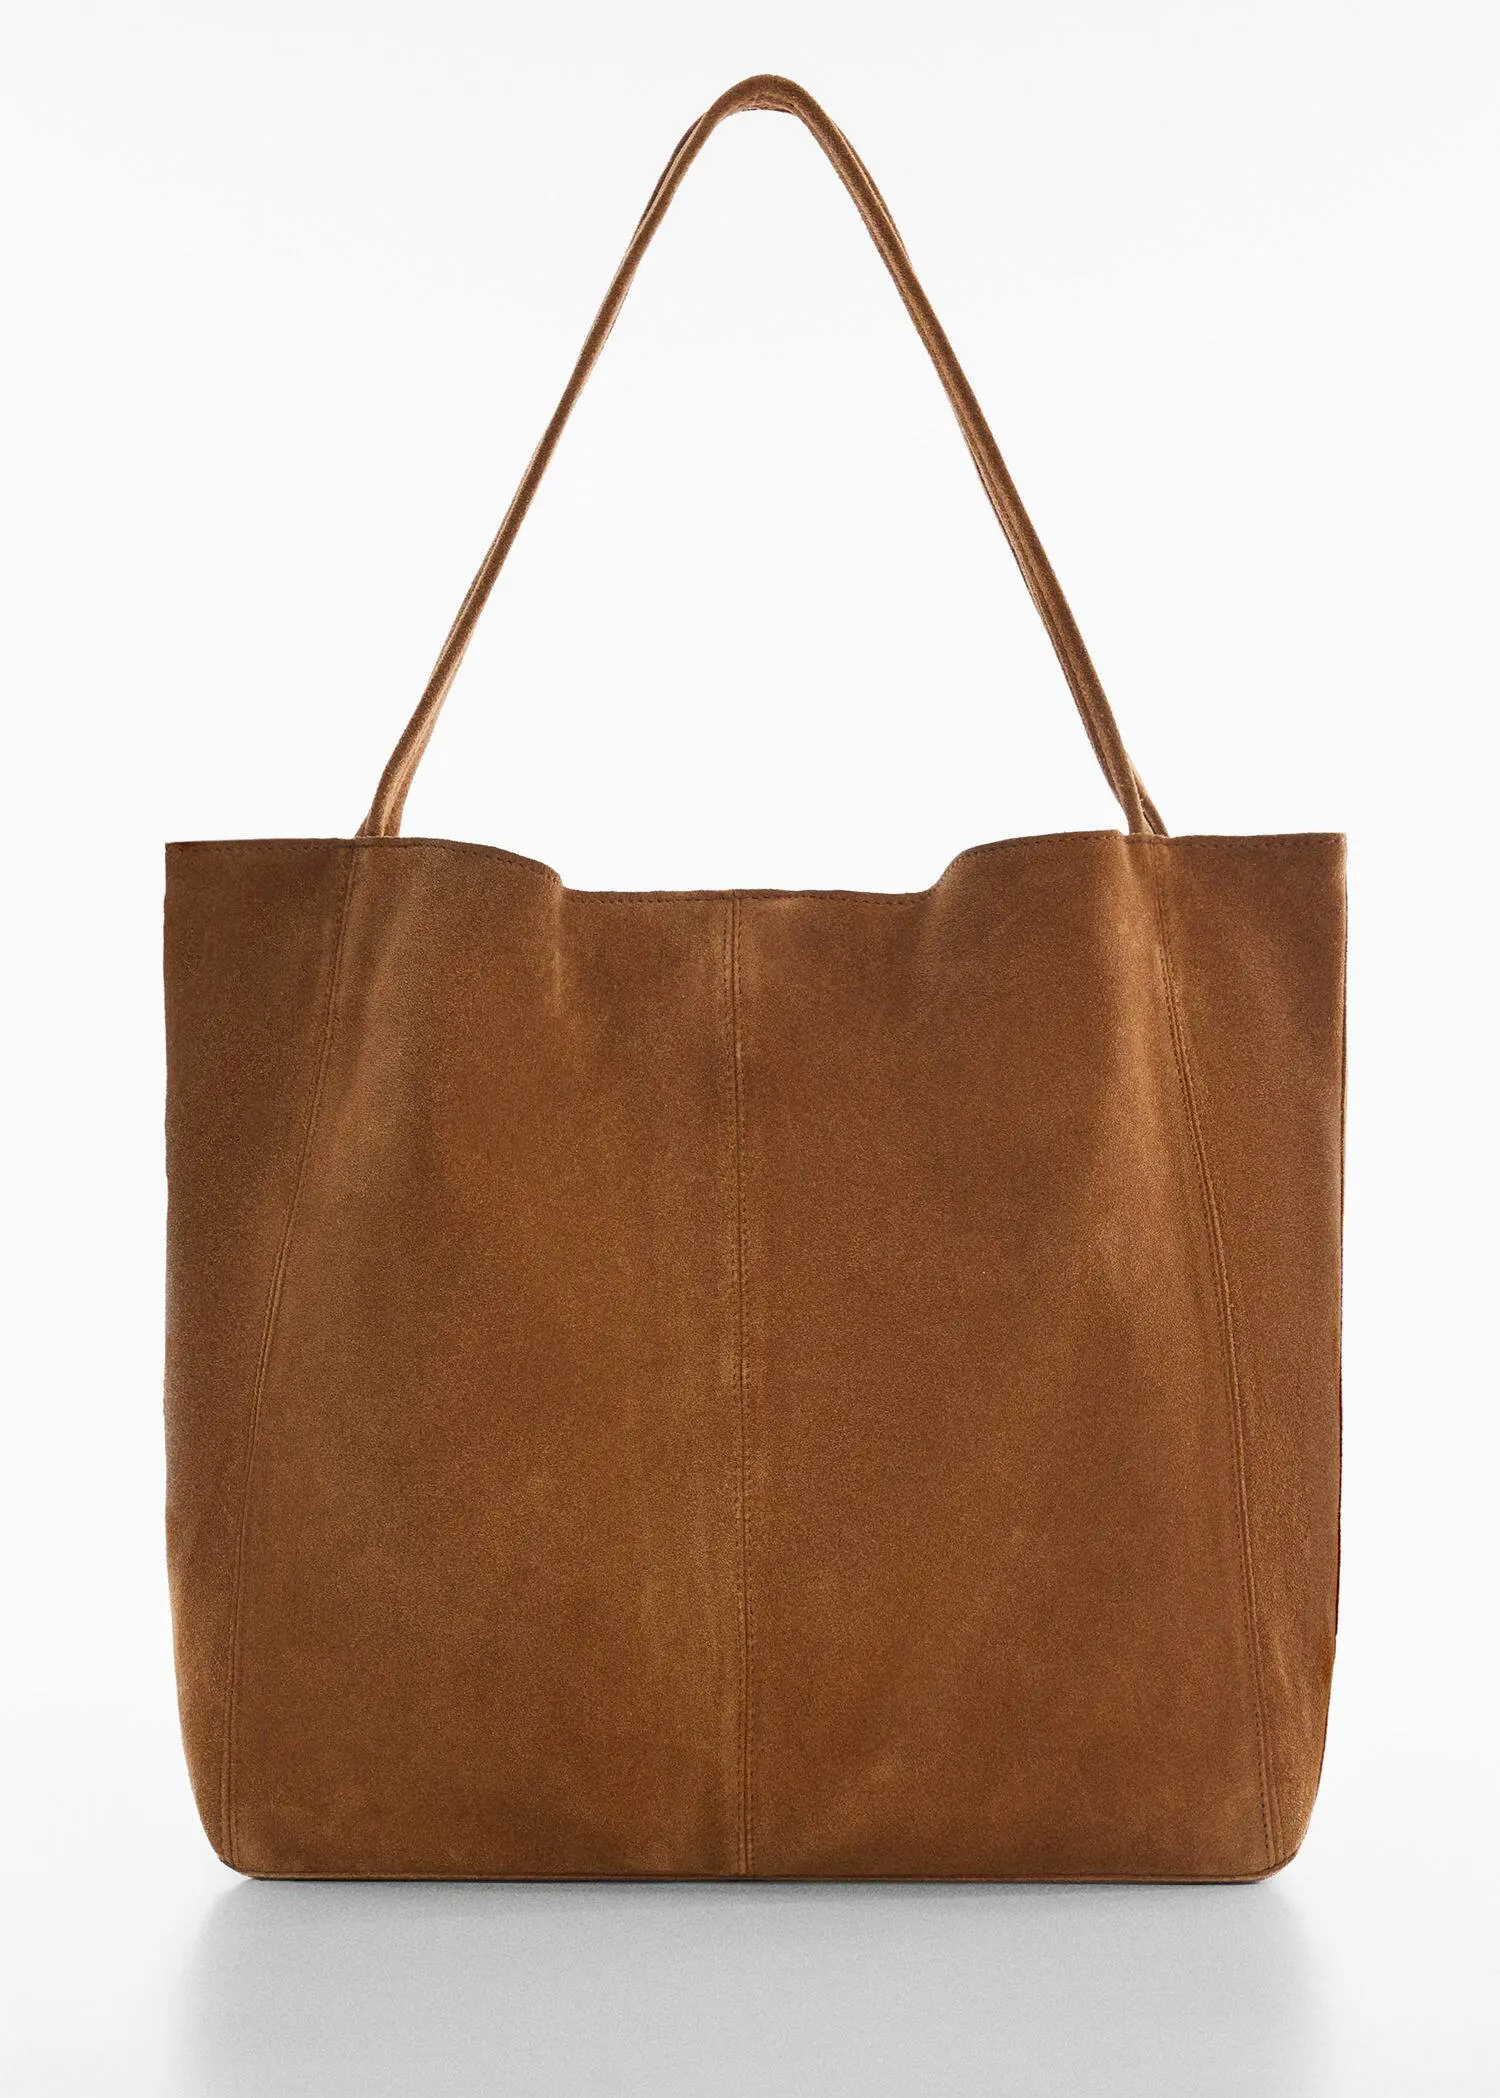 Mango Leather shopper bag. a brown leather bag hanging on a white wall. 